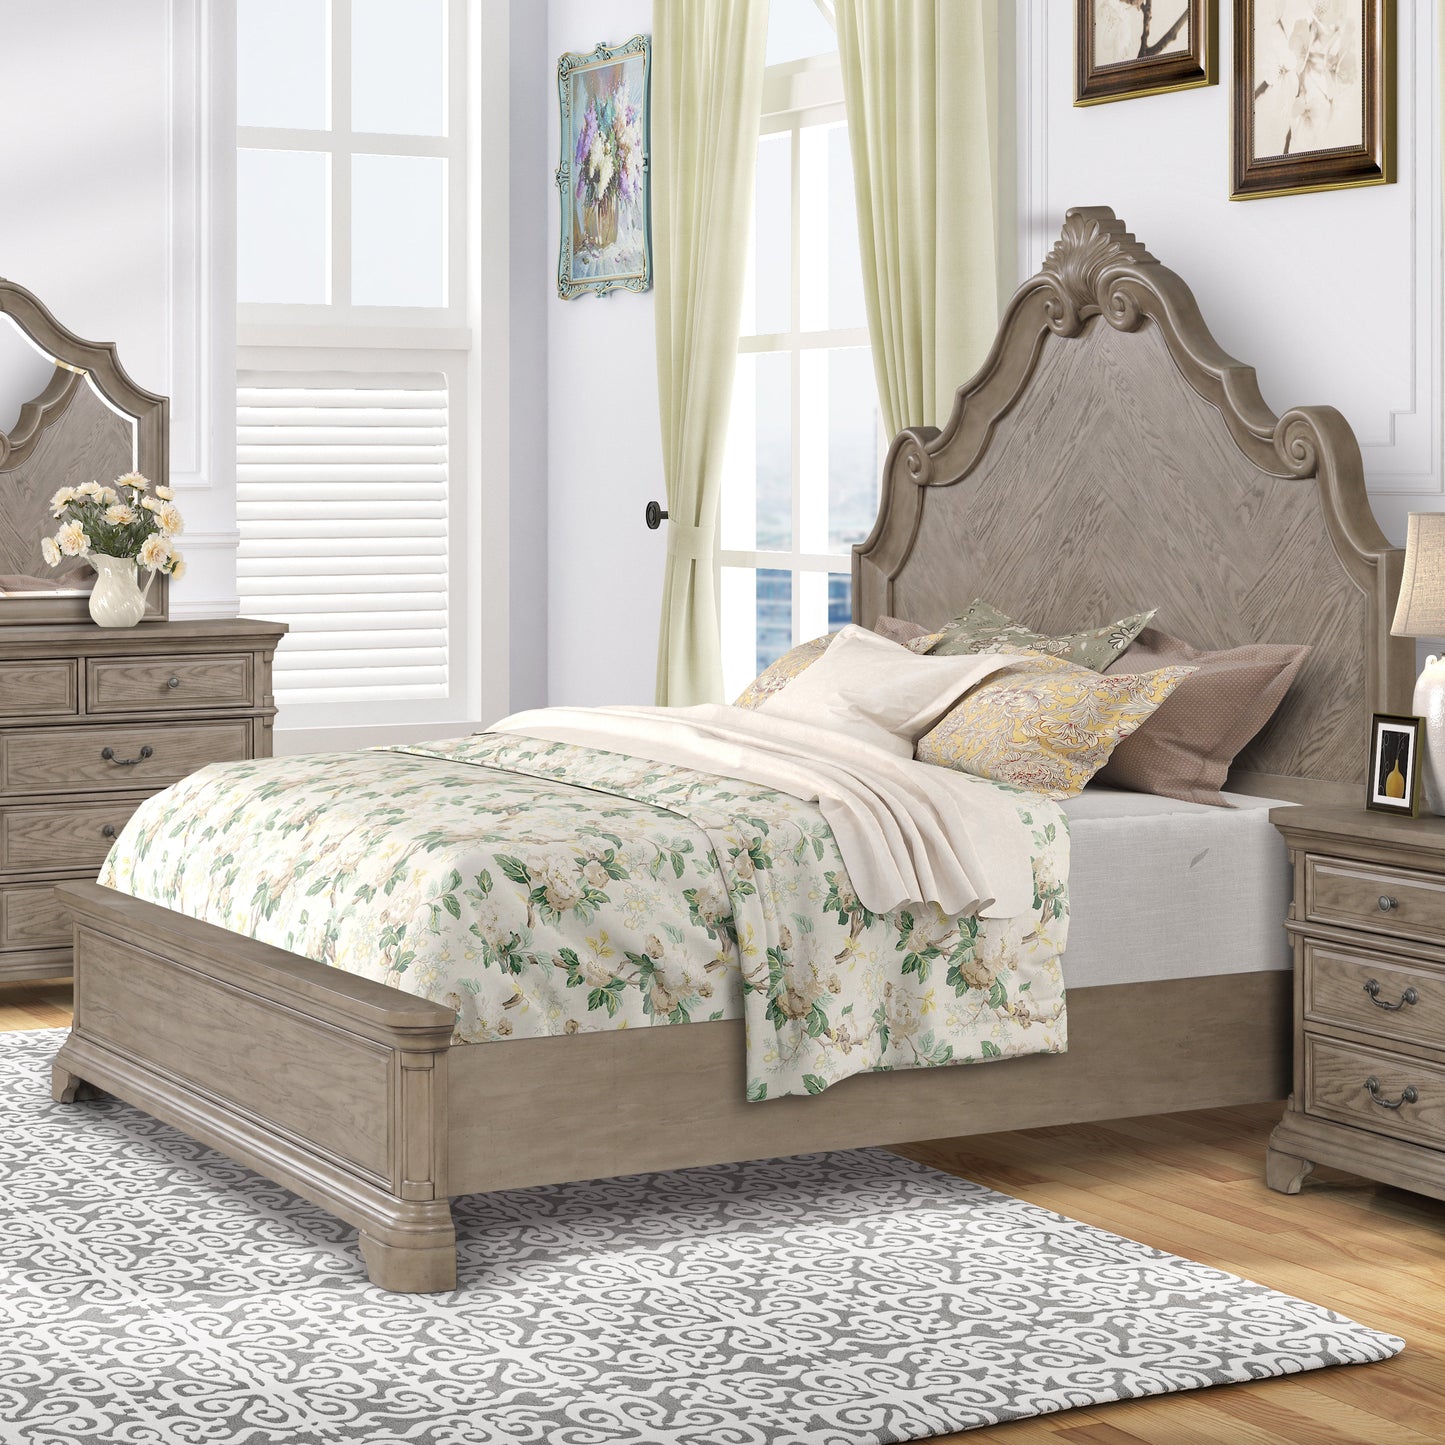 Levan Carved Wood Bed in Light Gray